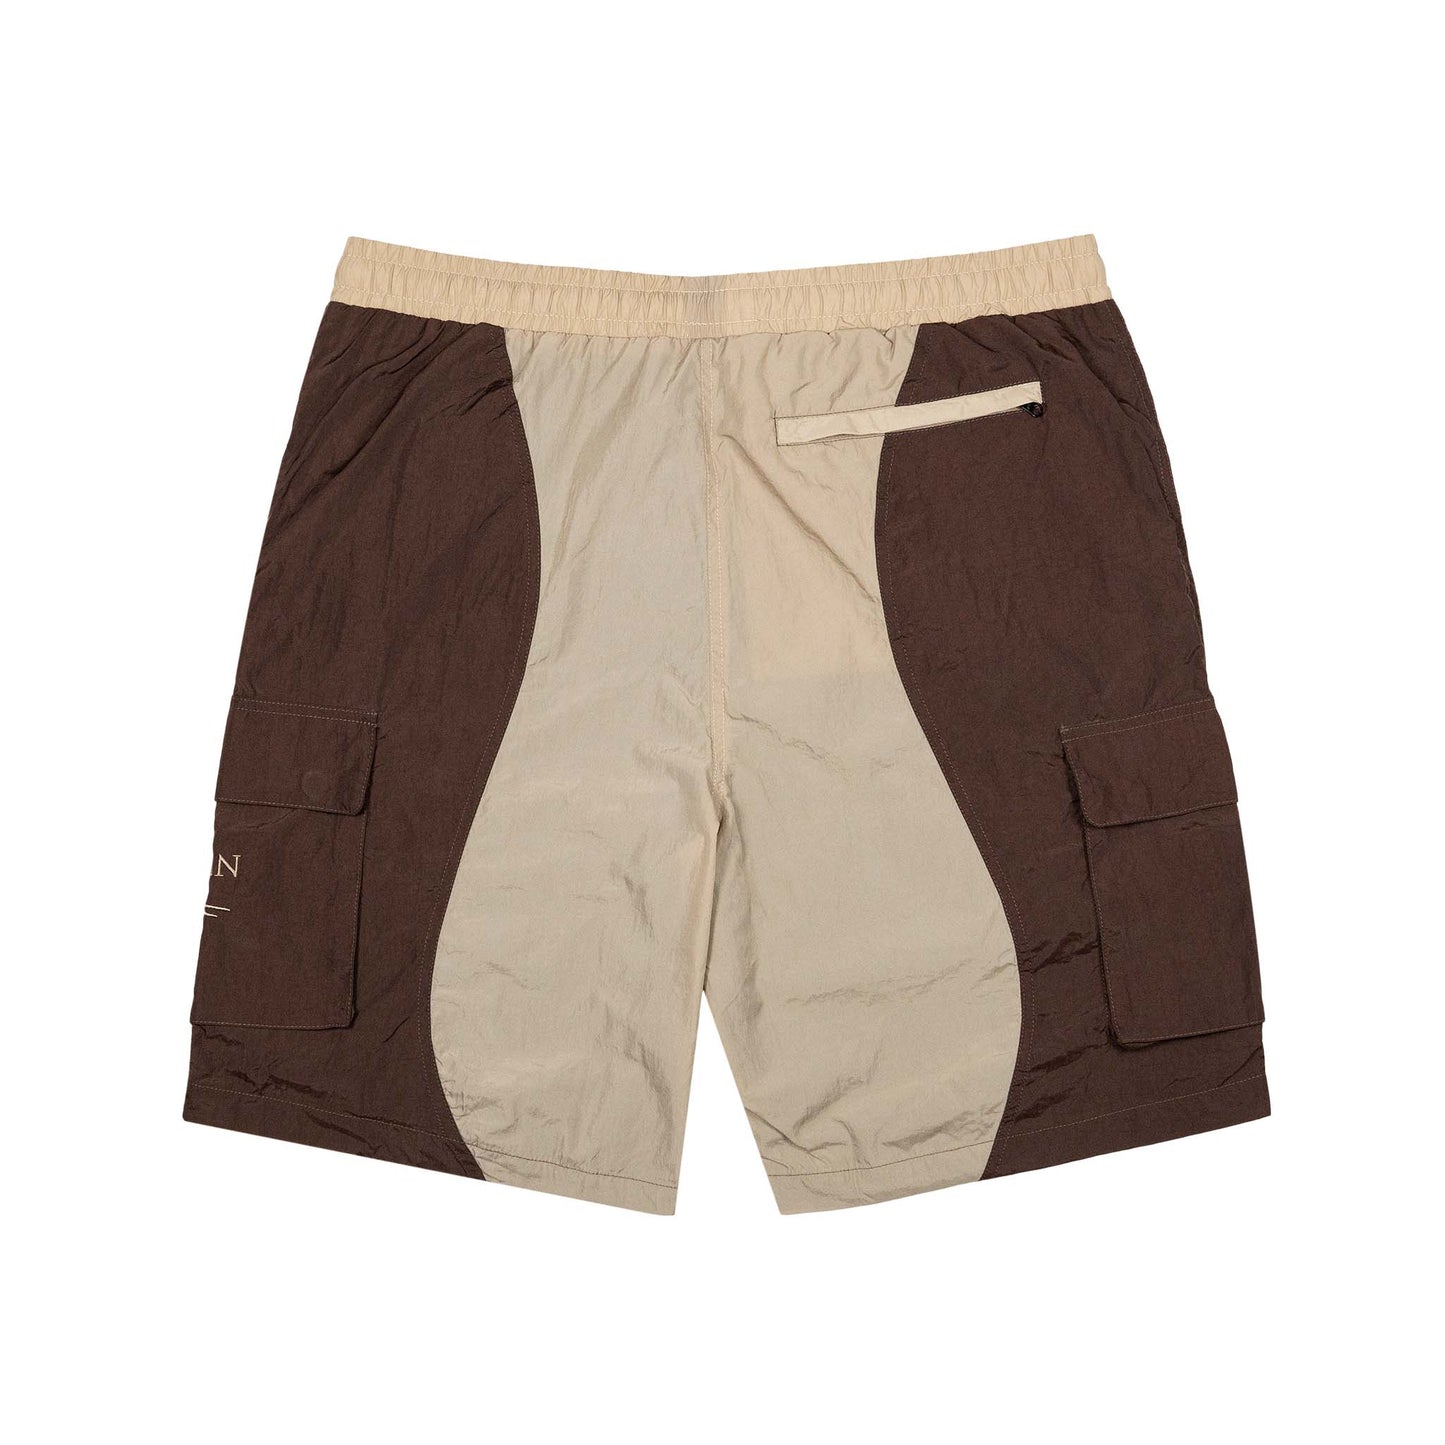 Load image into Gallery viewer, Wave Shorts - Brown/Tan
